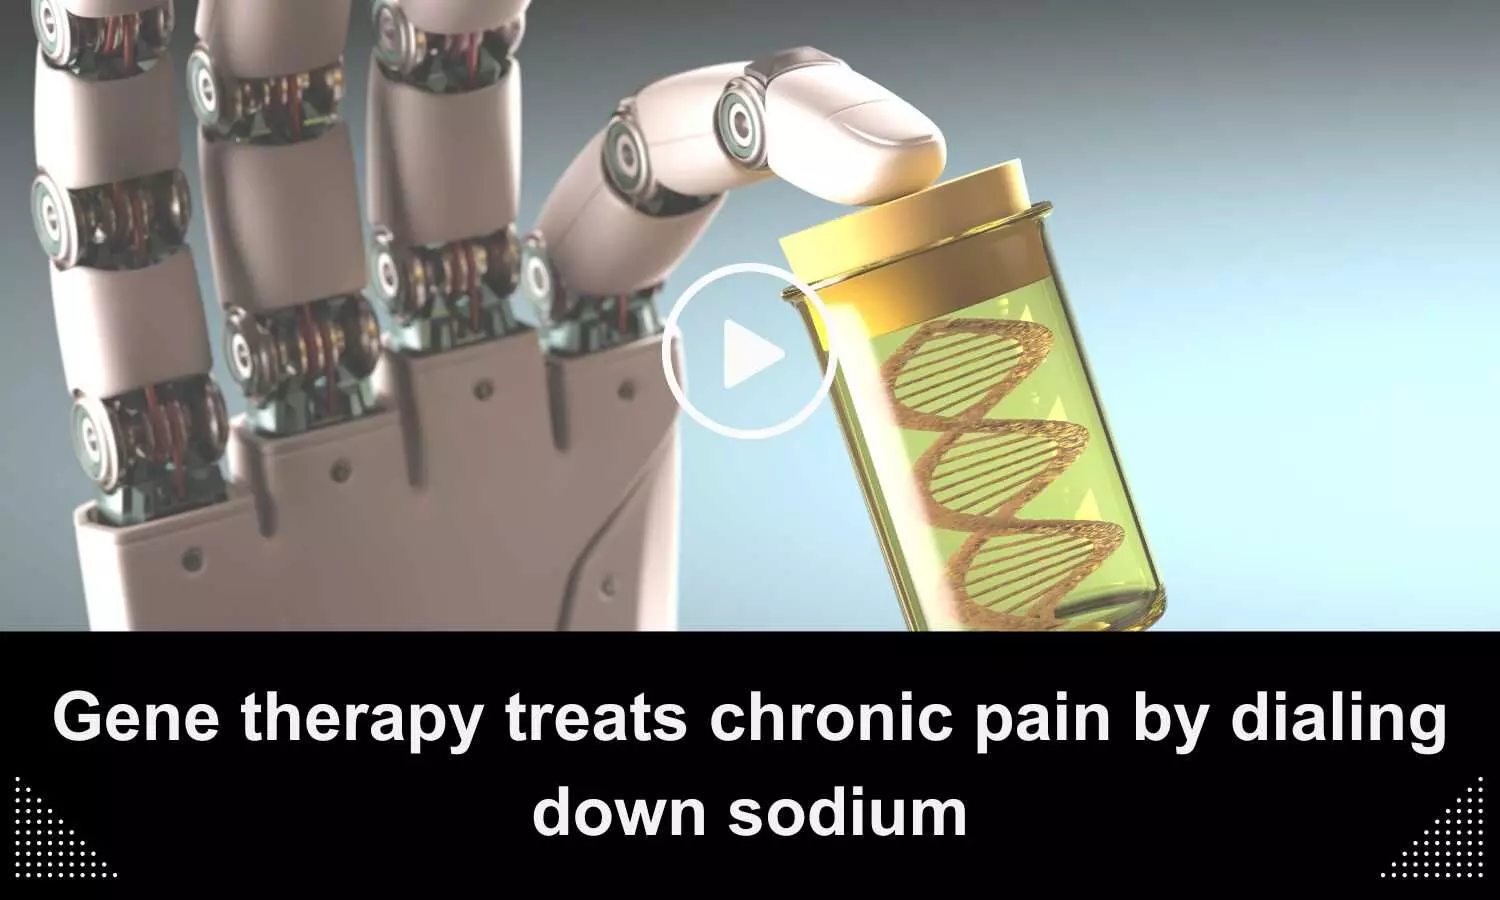 Gene therapy treats chronic pain by dialing down sodium